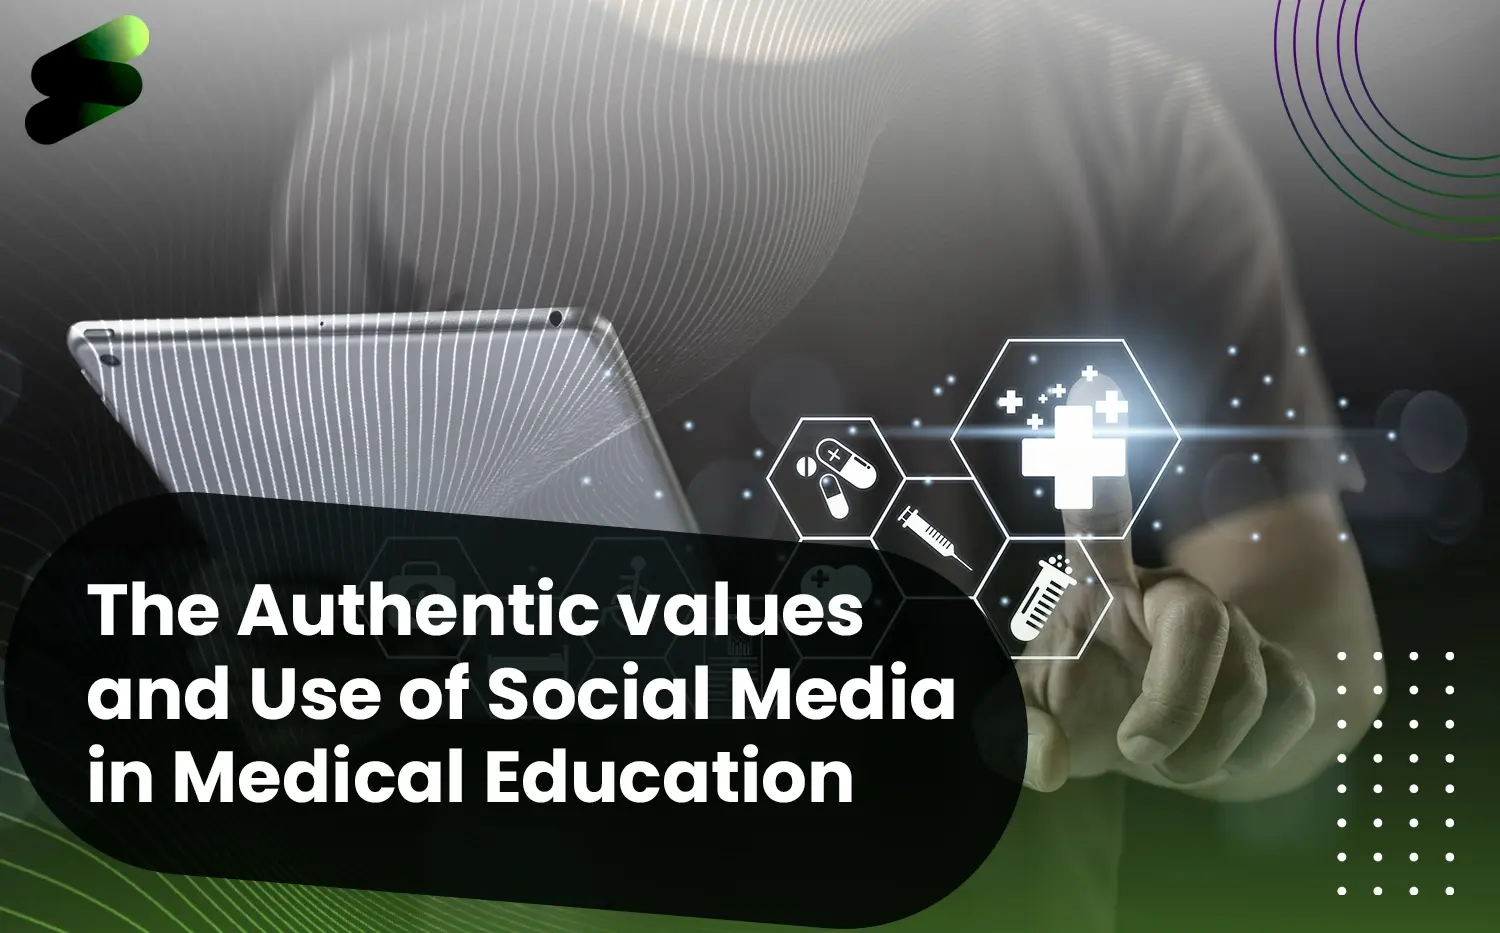 The Authentic values and Use of Social Media in Medical Education